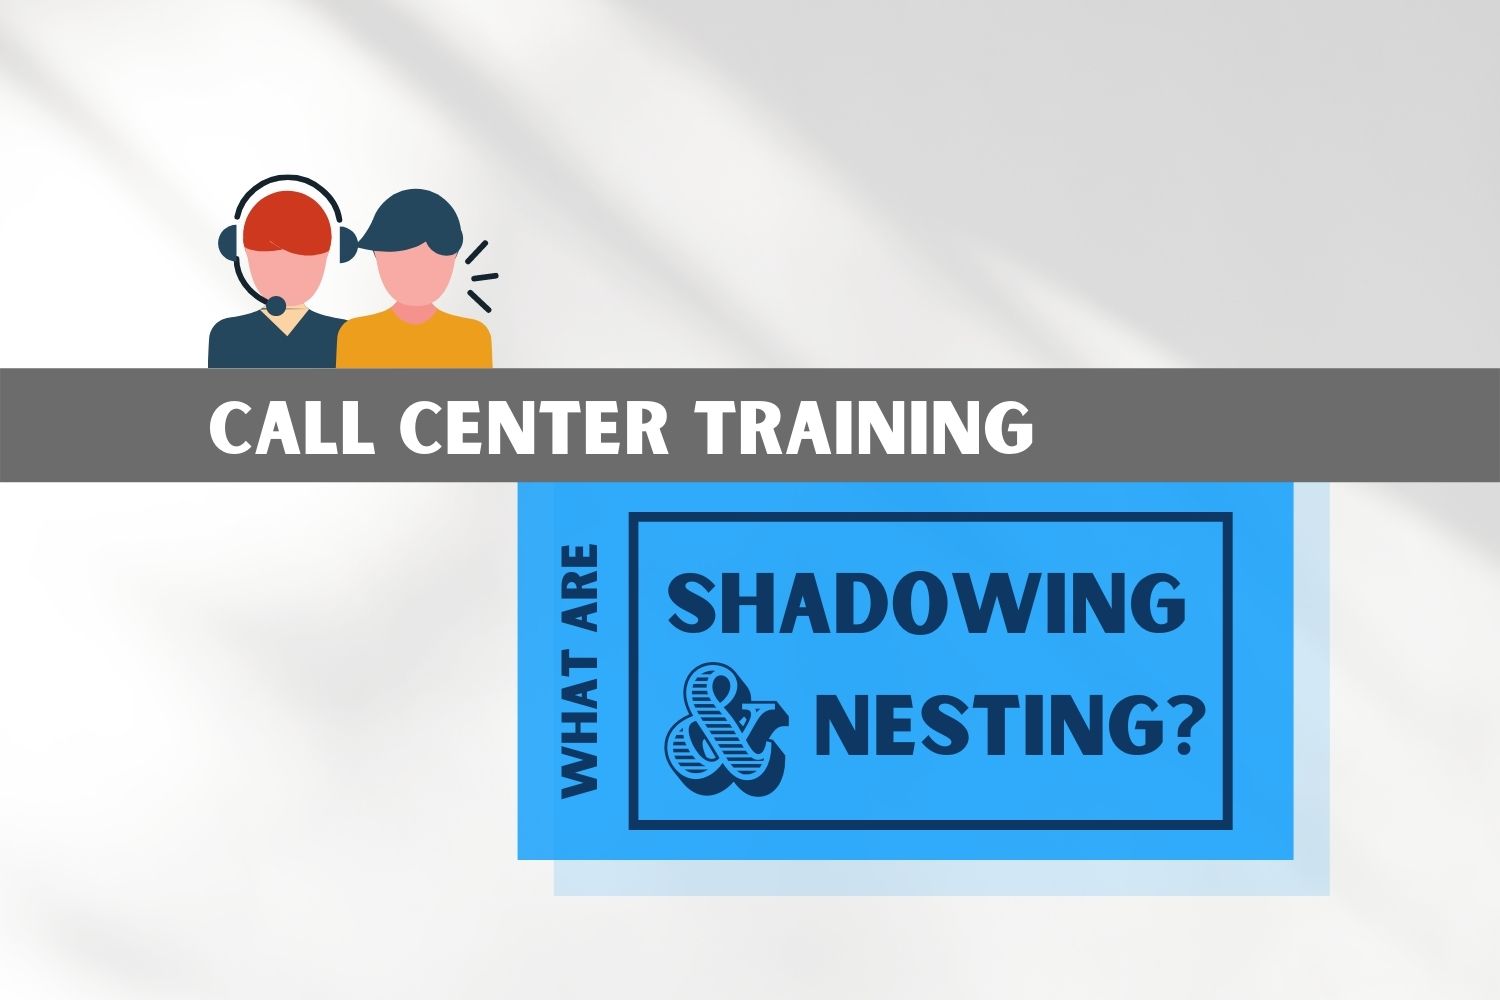 Call Center Training: What are Shadowing and Nesting?